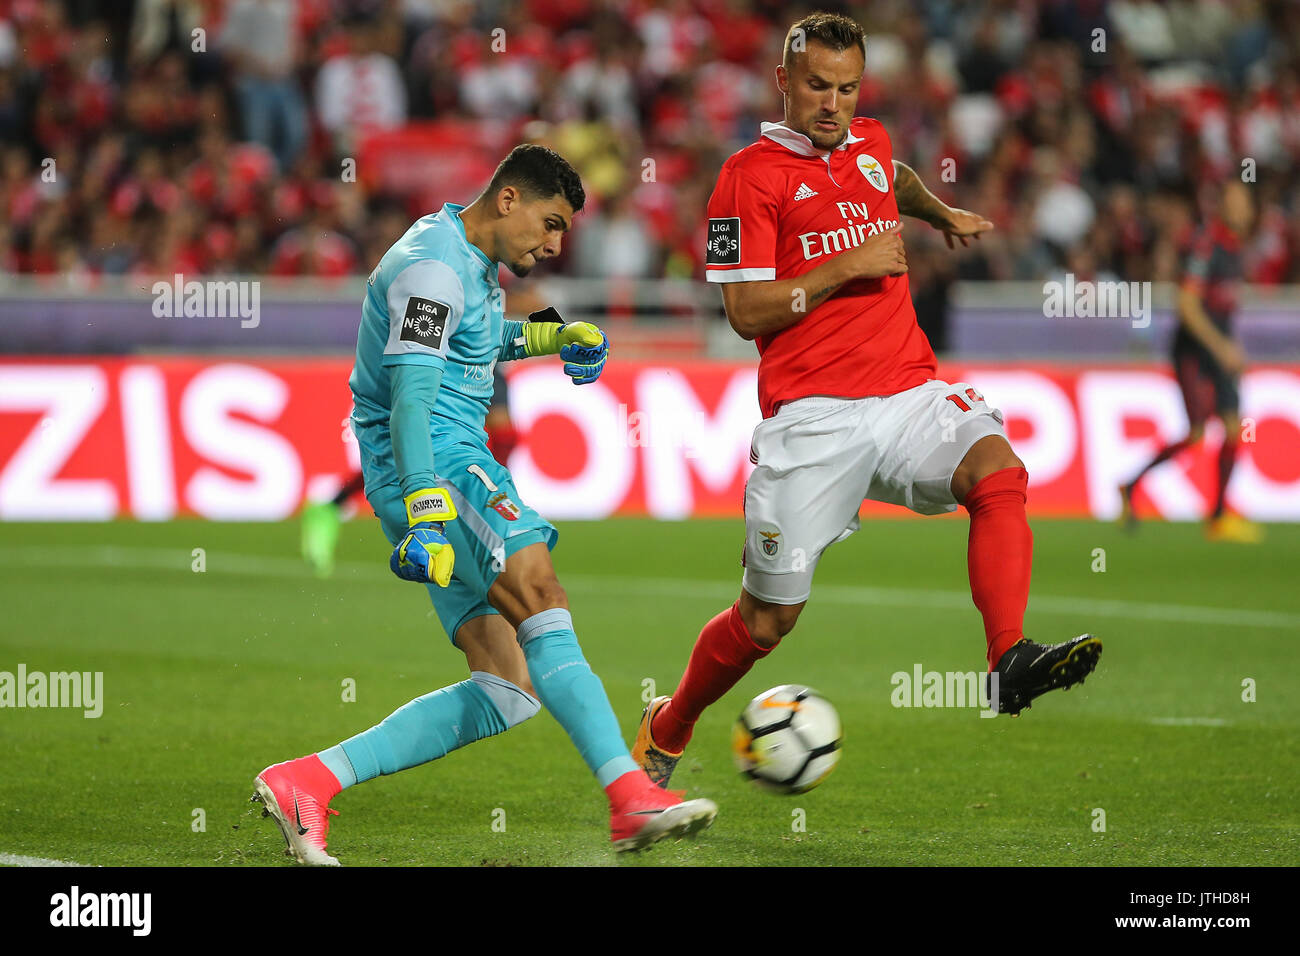 Lisbon, Portugal. 09th Aug, 2017. Braga«s goalkeeper Matheus Magalhaes from Brazil (L) and Benfica«s forward Haris Seferovic from Switzerland (R) during the Premier League 2017/18 match between SL Benfica v SC Braga, at Luz Stadium in Lisbon on August 9, 2017. Credit: Bruno Barros/Alamy Live News Stock Photo